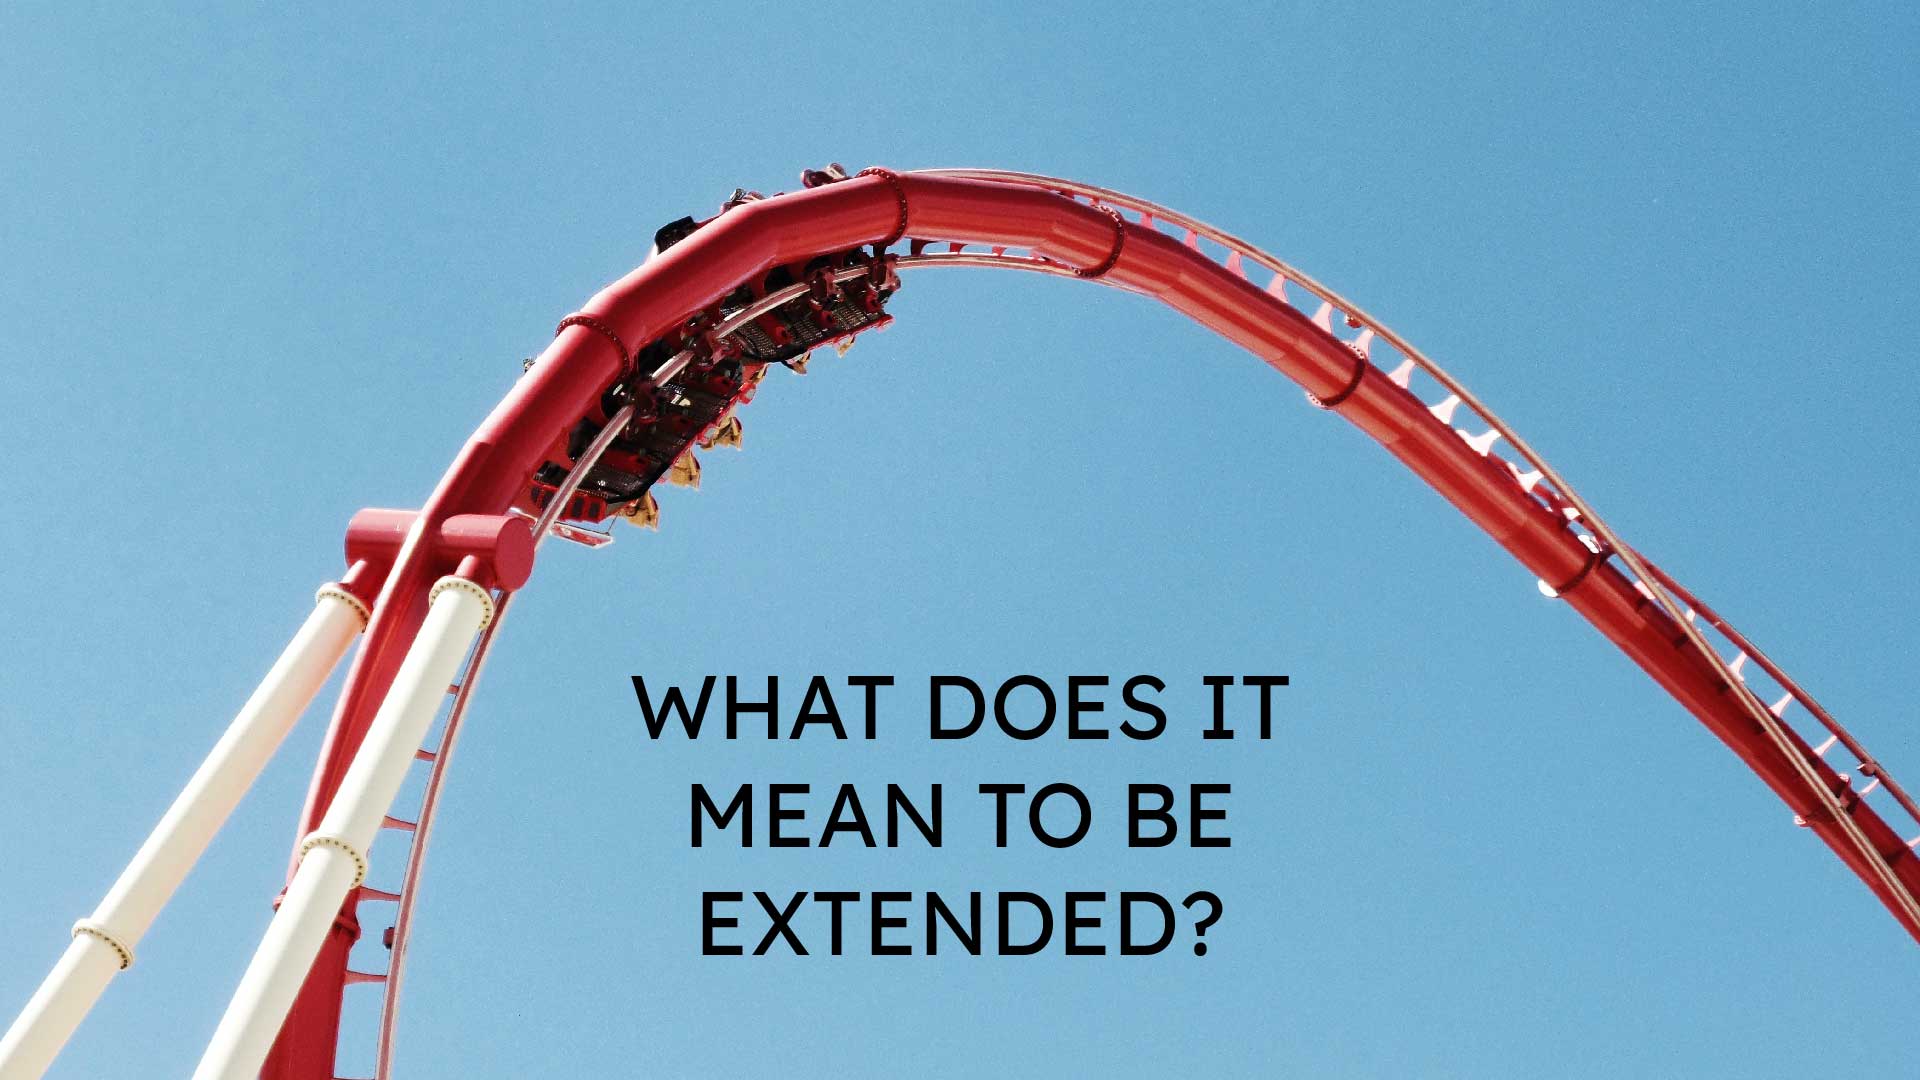 What Does it Mean to be Extended?